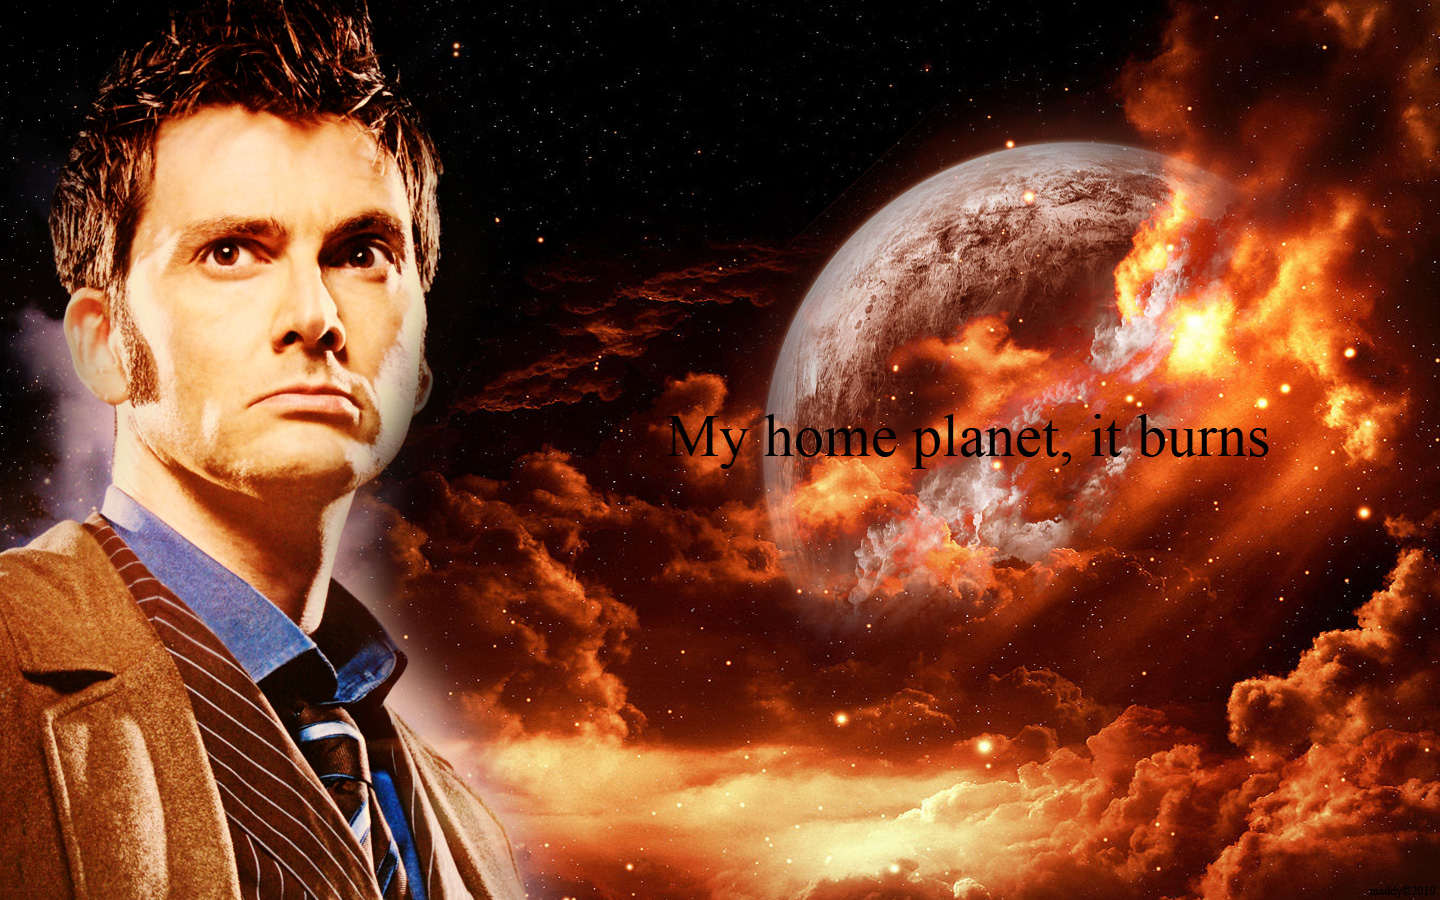 The-Tenth-Doctor-the-tenth-doctor-24366566-1440-900.jpg